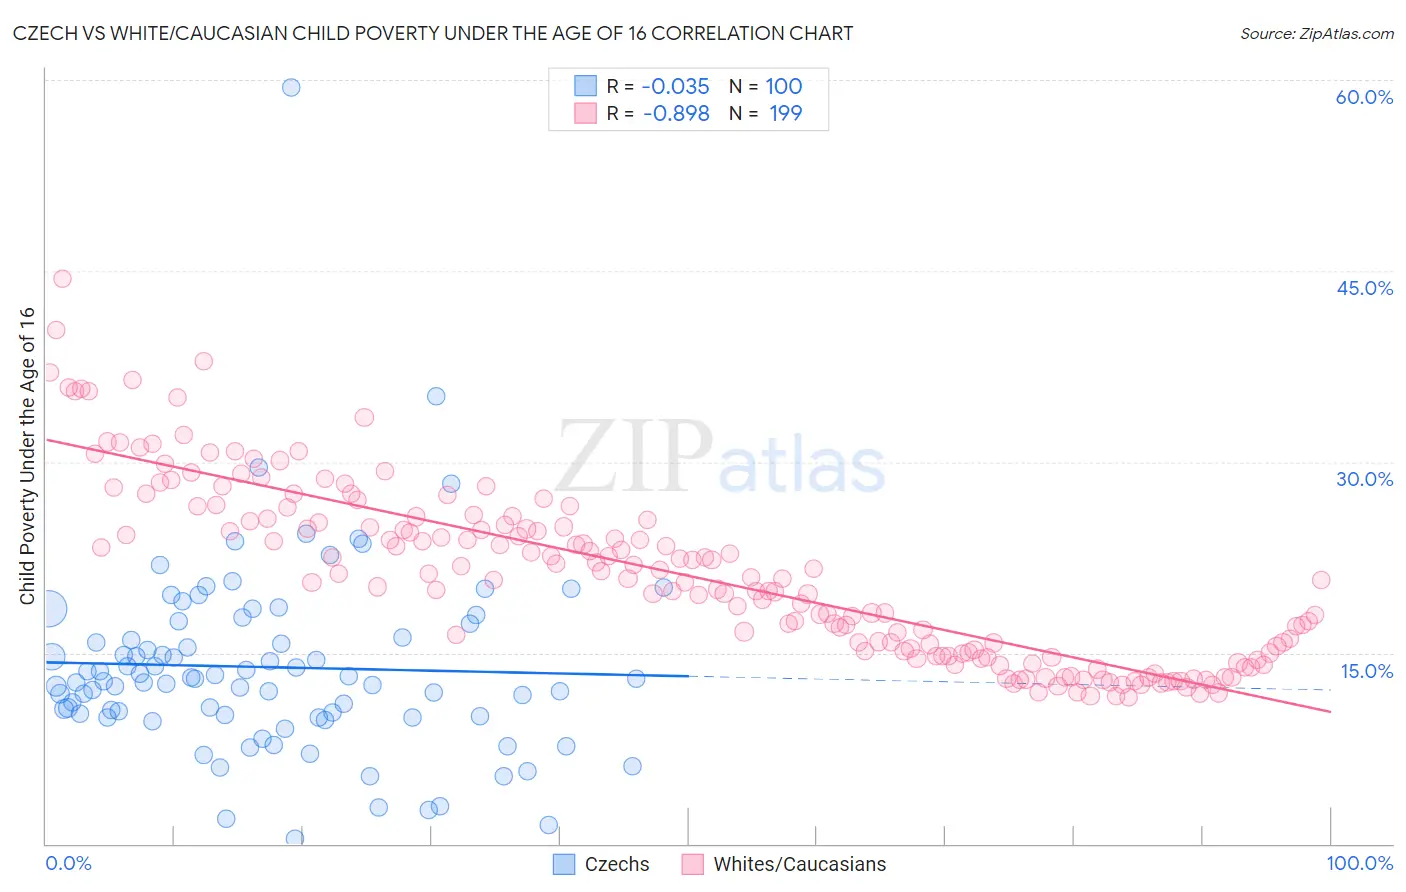 Czech vs White/Caucasian Child Poverty Under the Age of 16